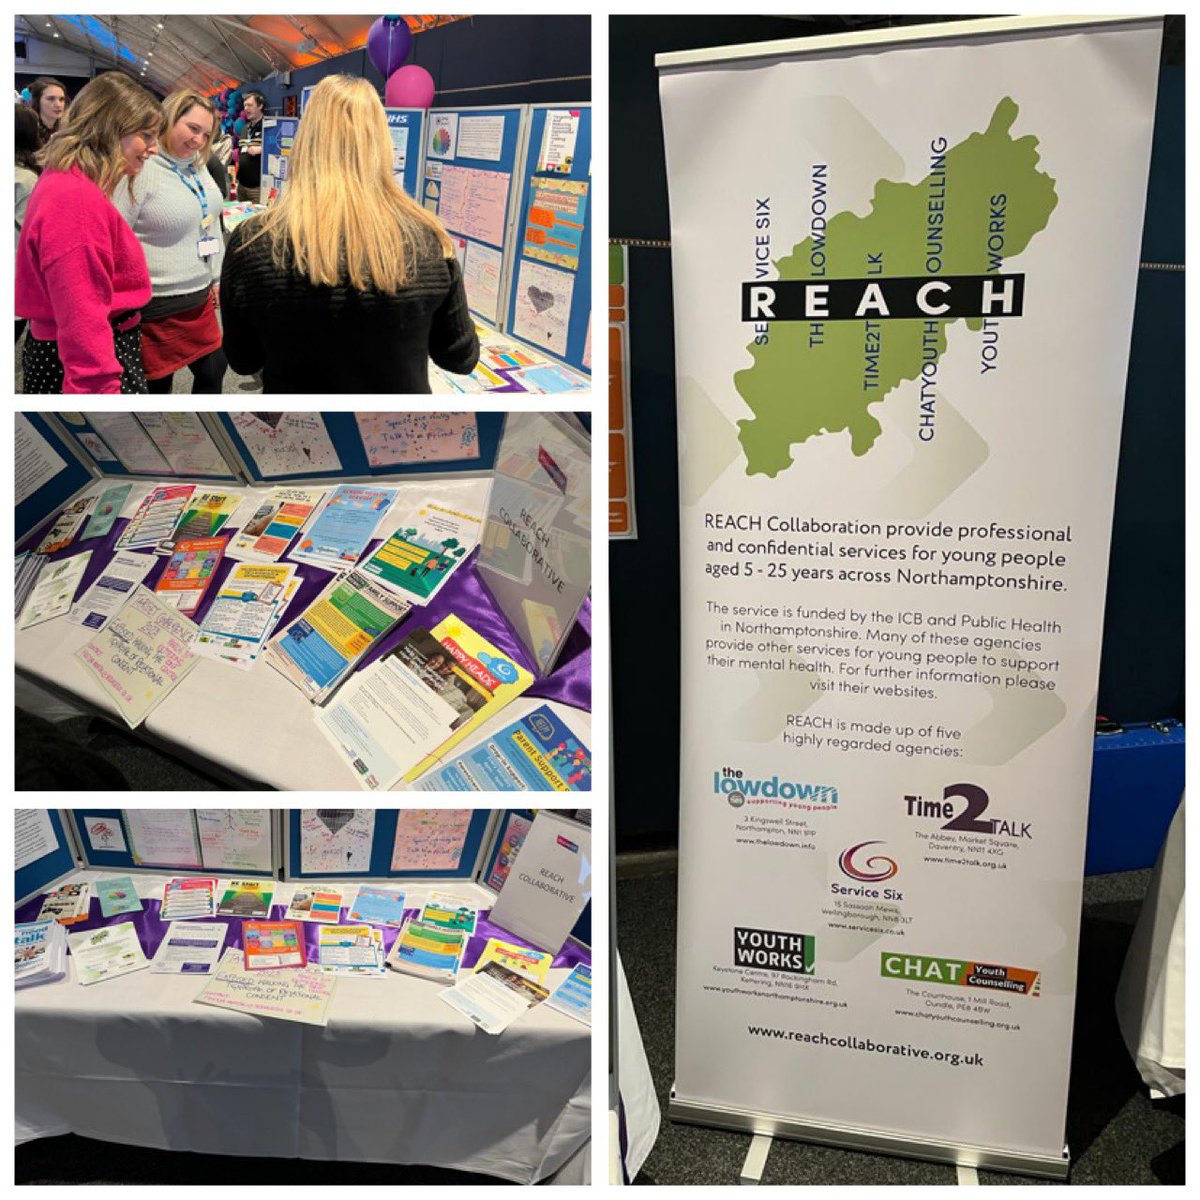 We’ve had a fabulous day with our REACH Partners at the #wearenhftcyp event. Meeting our friends and colleagues to share our information and learn what we are all doing to support young people in Northamptonshire. #wearenhft #youthservices #youngpeople #northamptonshire #nhft